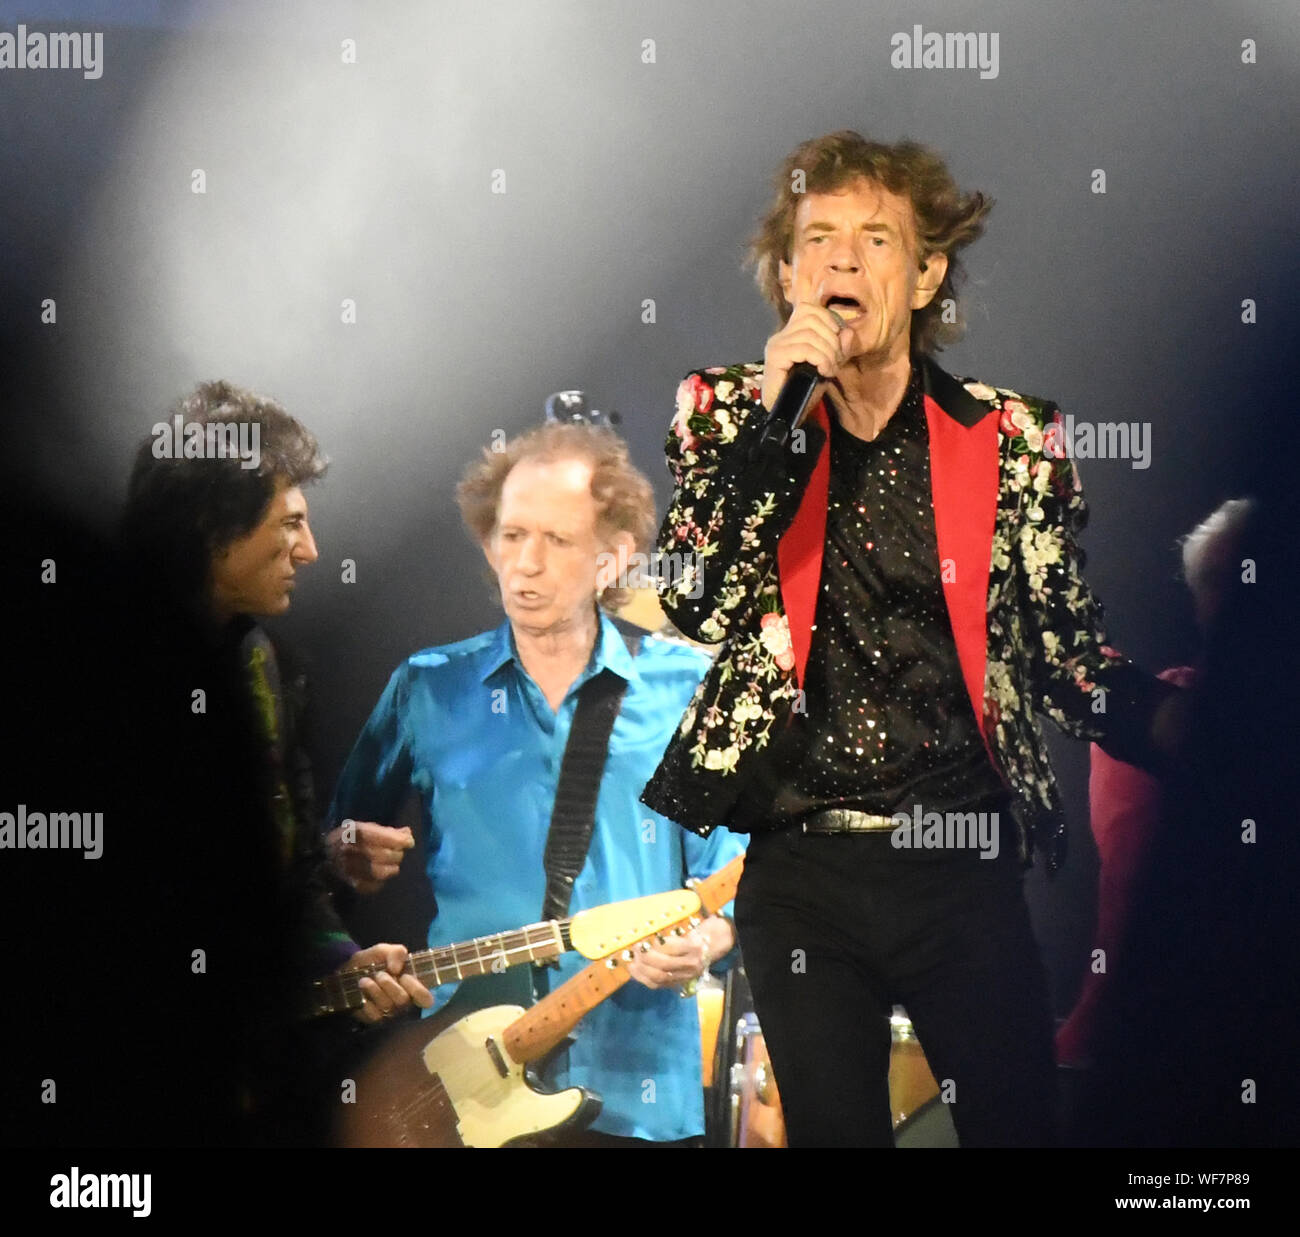 Miami Gardens, United States. 30th Aug, 2019. The Rolling Stones 2019 'No  Filter' tour perform on stage with Mick Jagger, Keith Richards and Ronnie  Wood at the Hard Rock Stadium in Miami